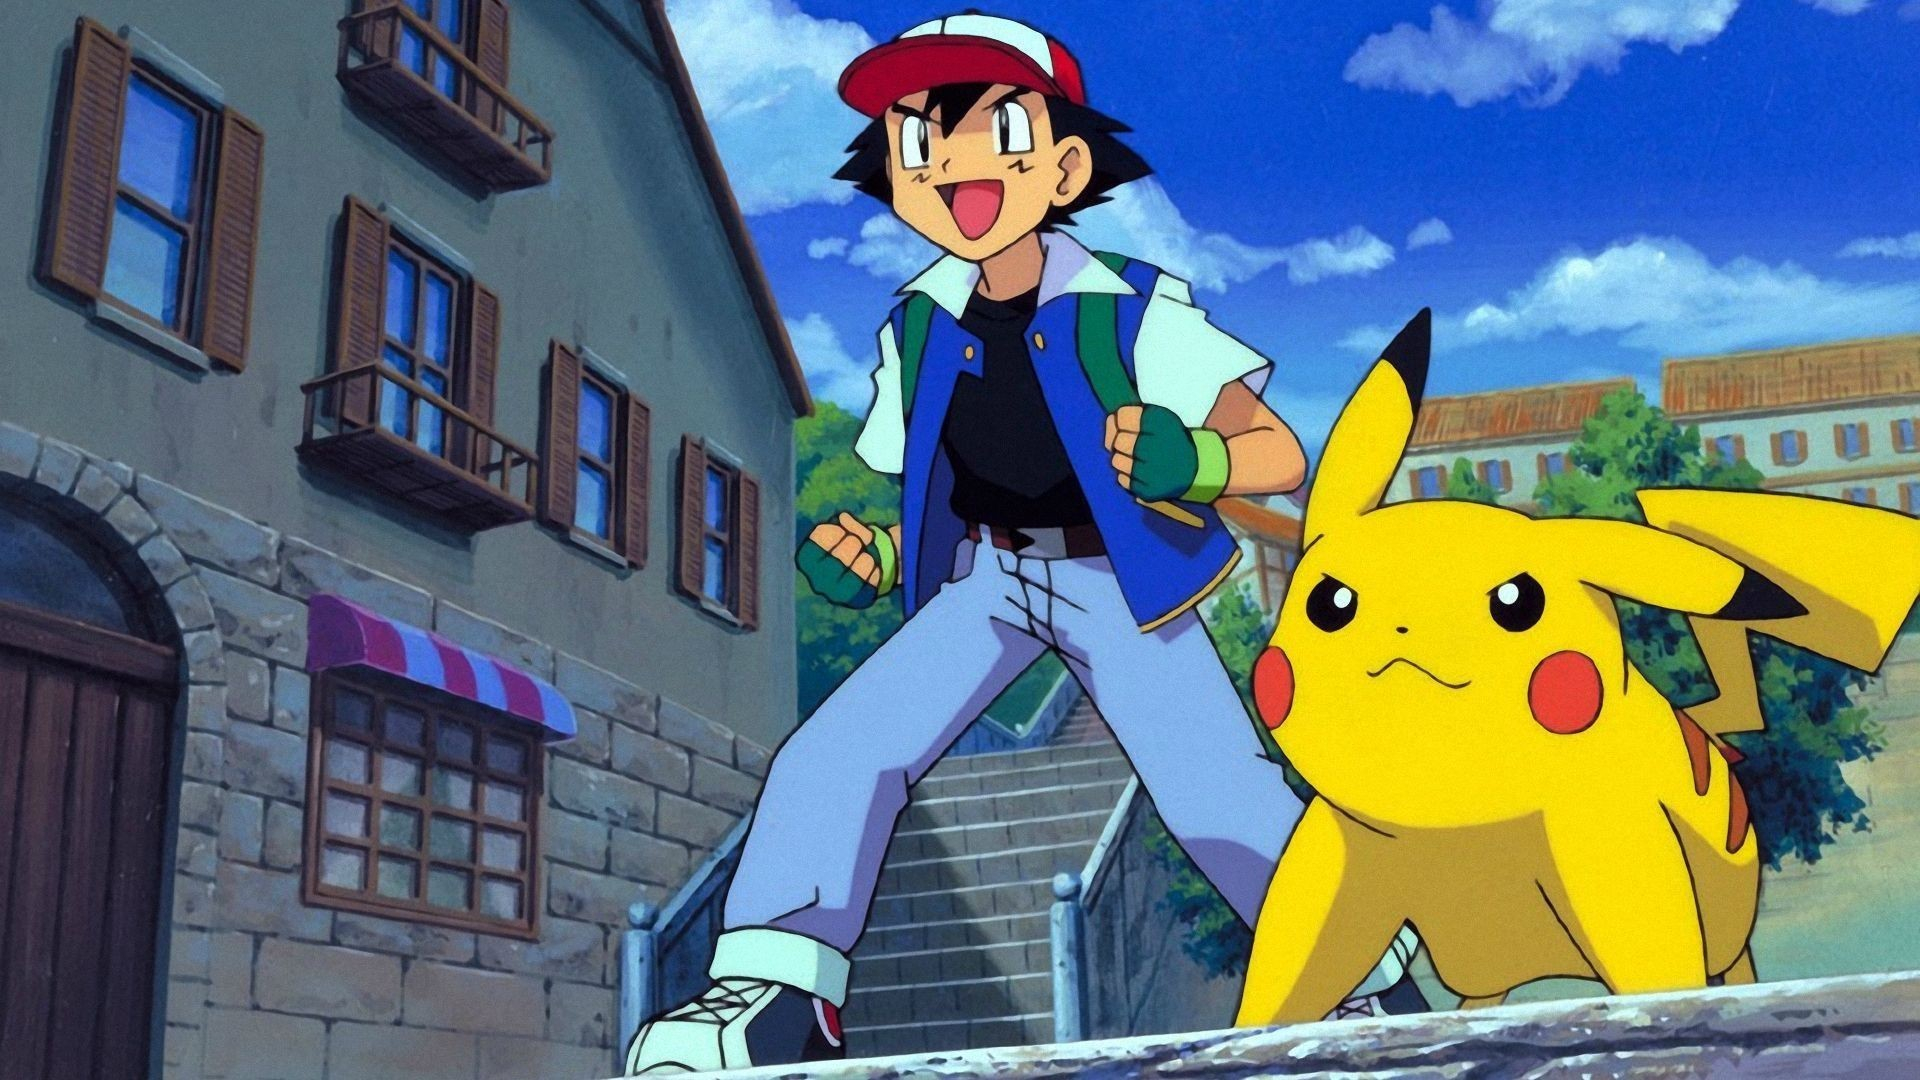 1920x1080 180+ Ash Ketchum HD Wallpapers and Backgrounds